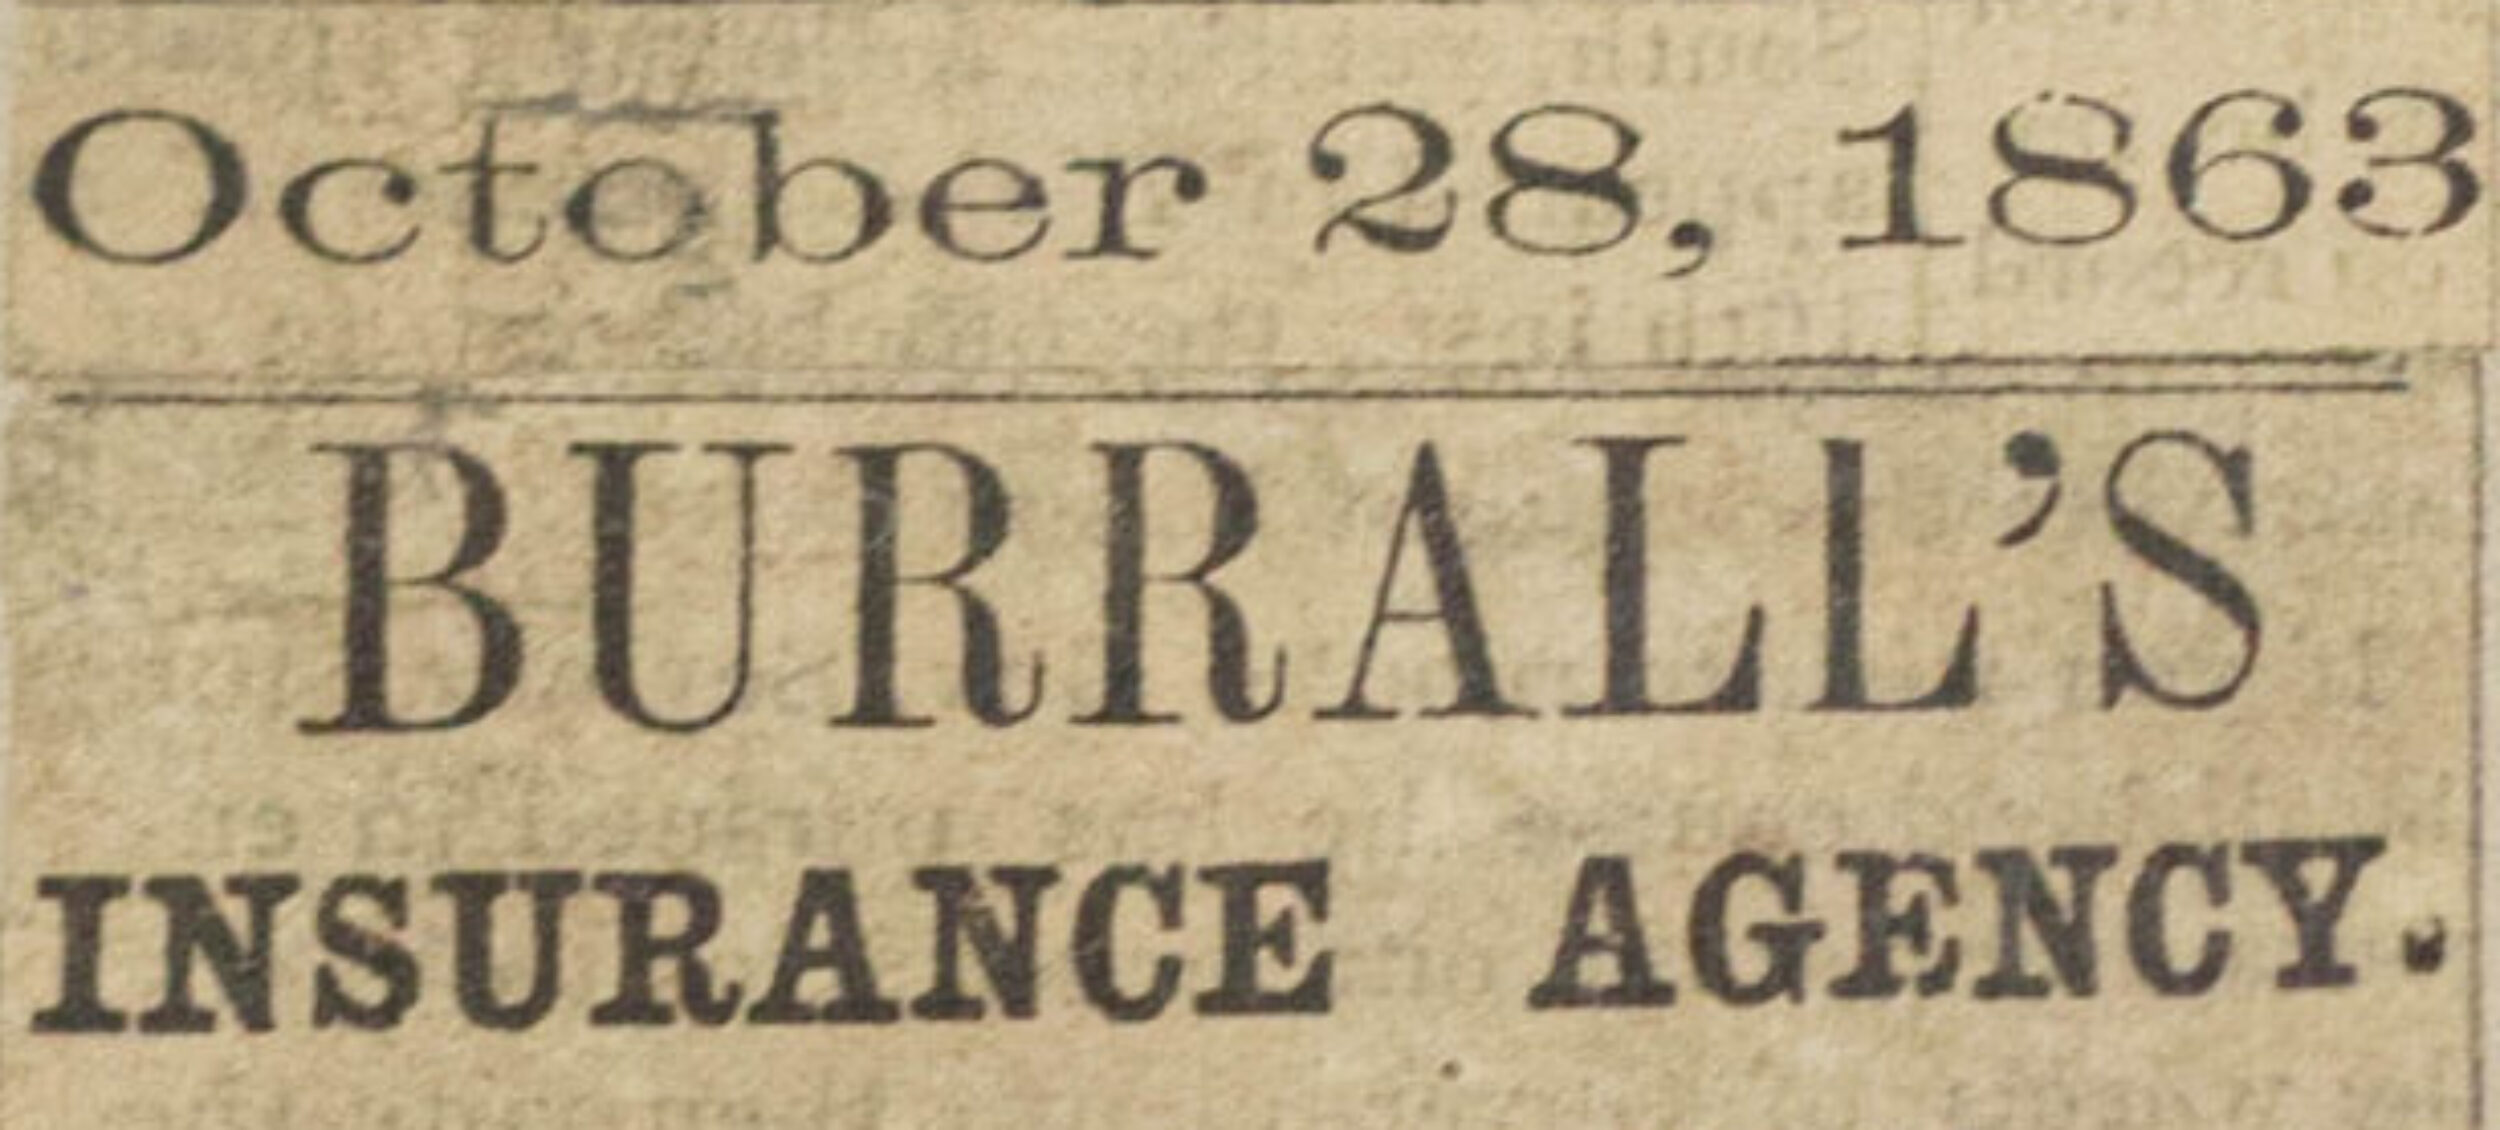 Geneva Courier Newspaper Article - C.S. Burrall and Son Insurance